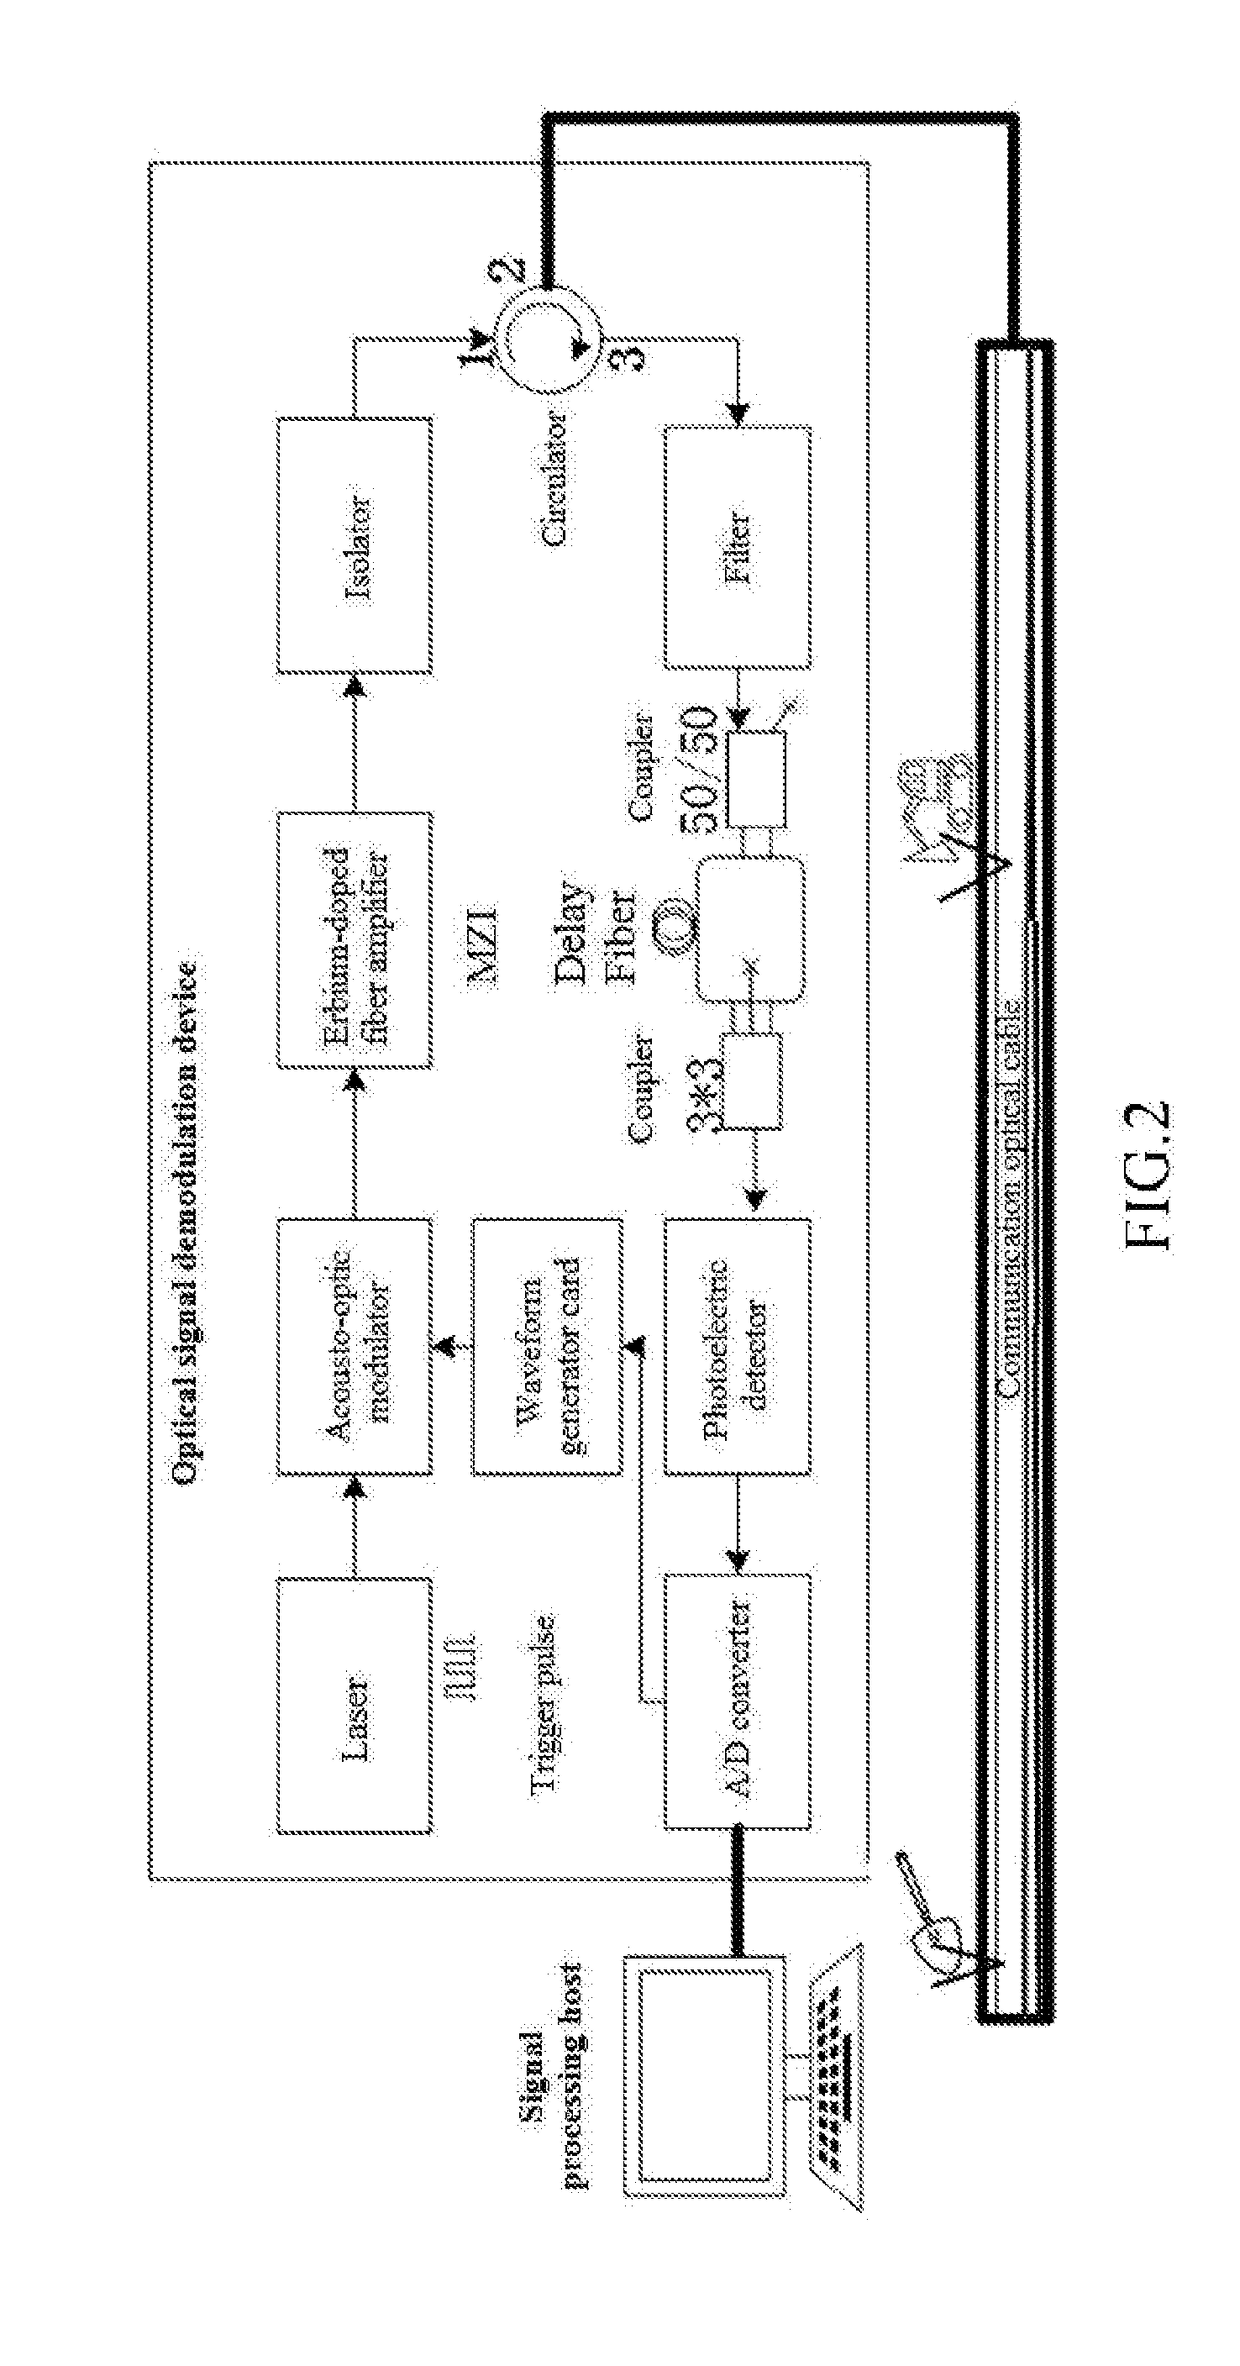 1D-CNN-Based Distributed Optical Fiber Sensing Signal Feature Learning and Classification Method